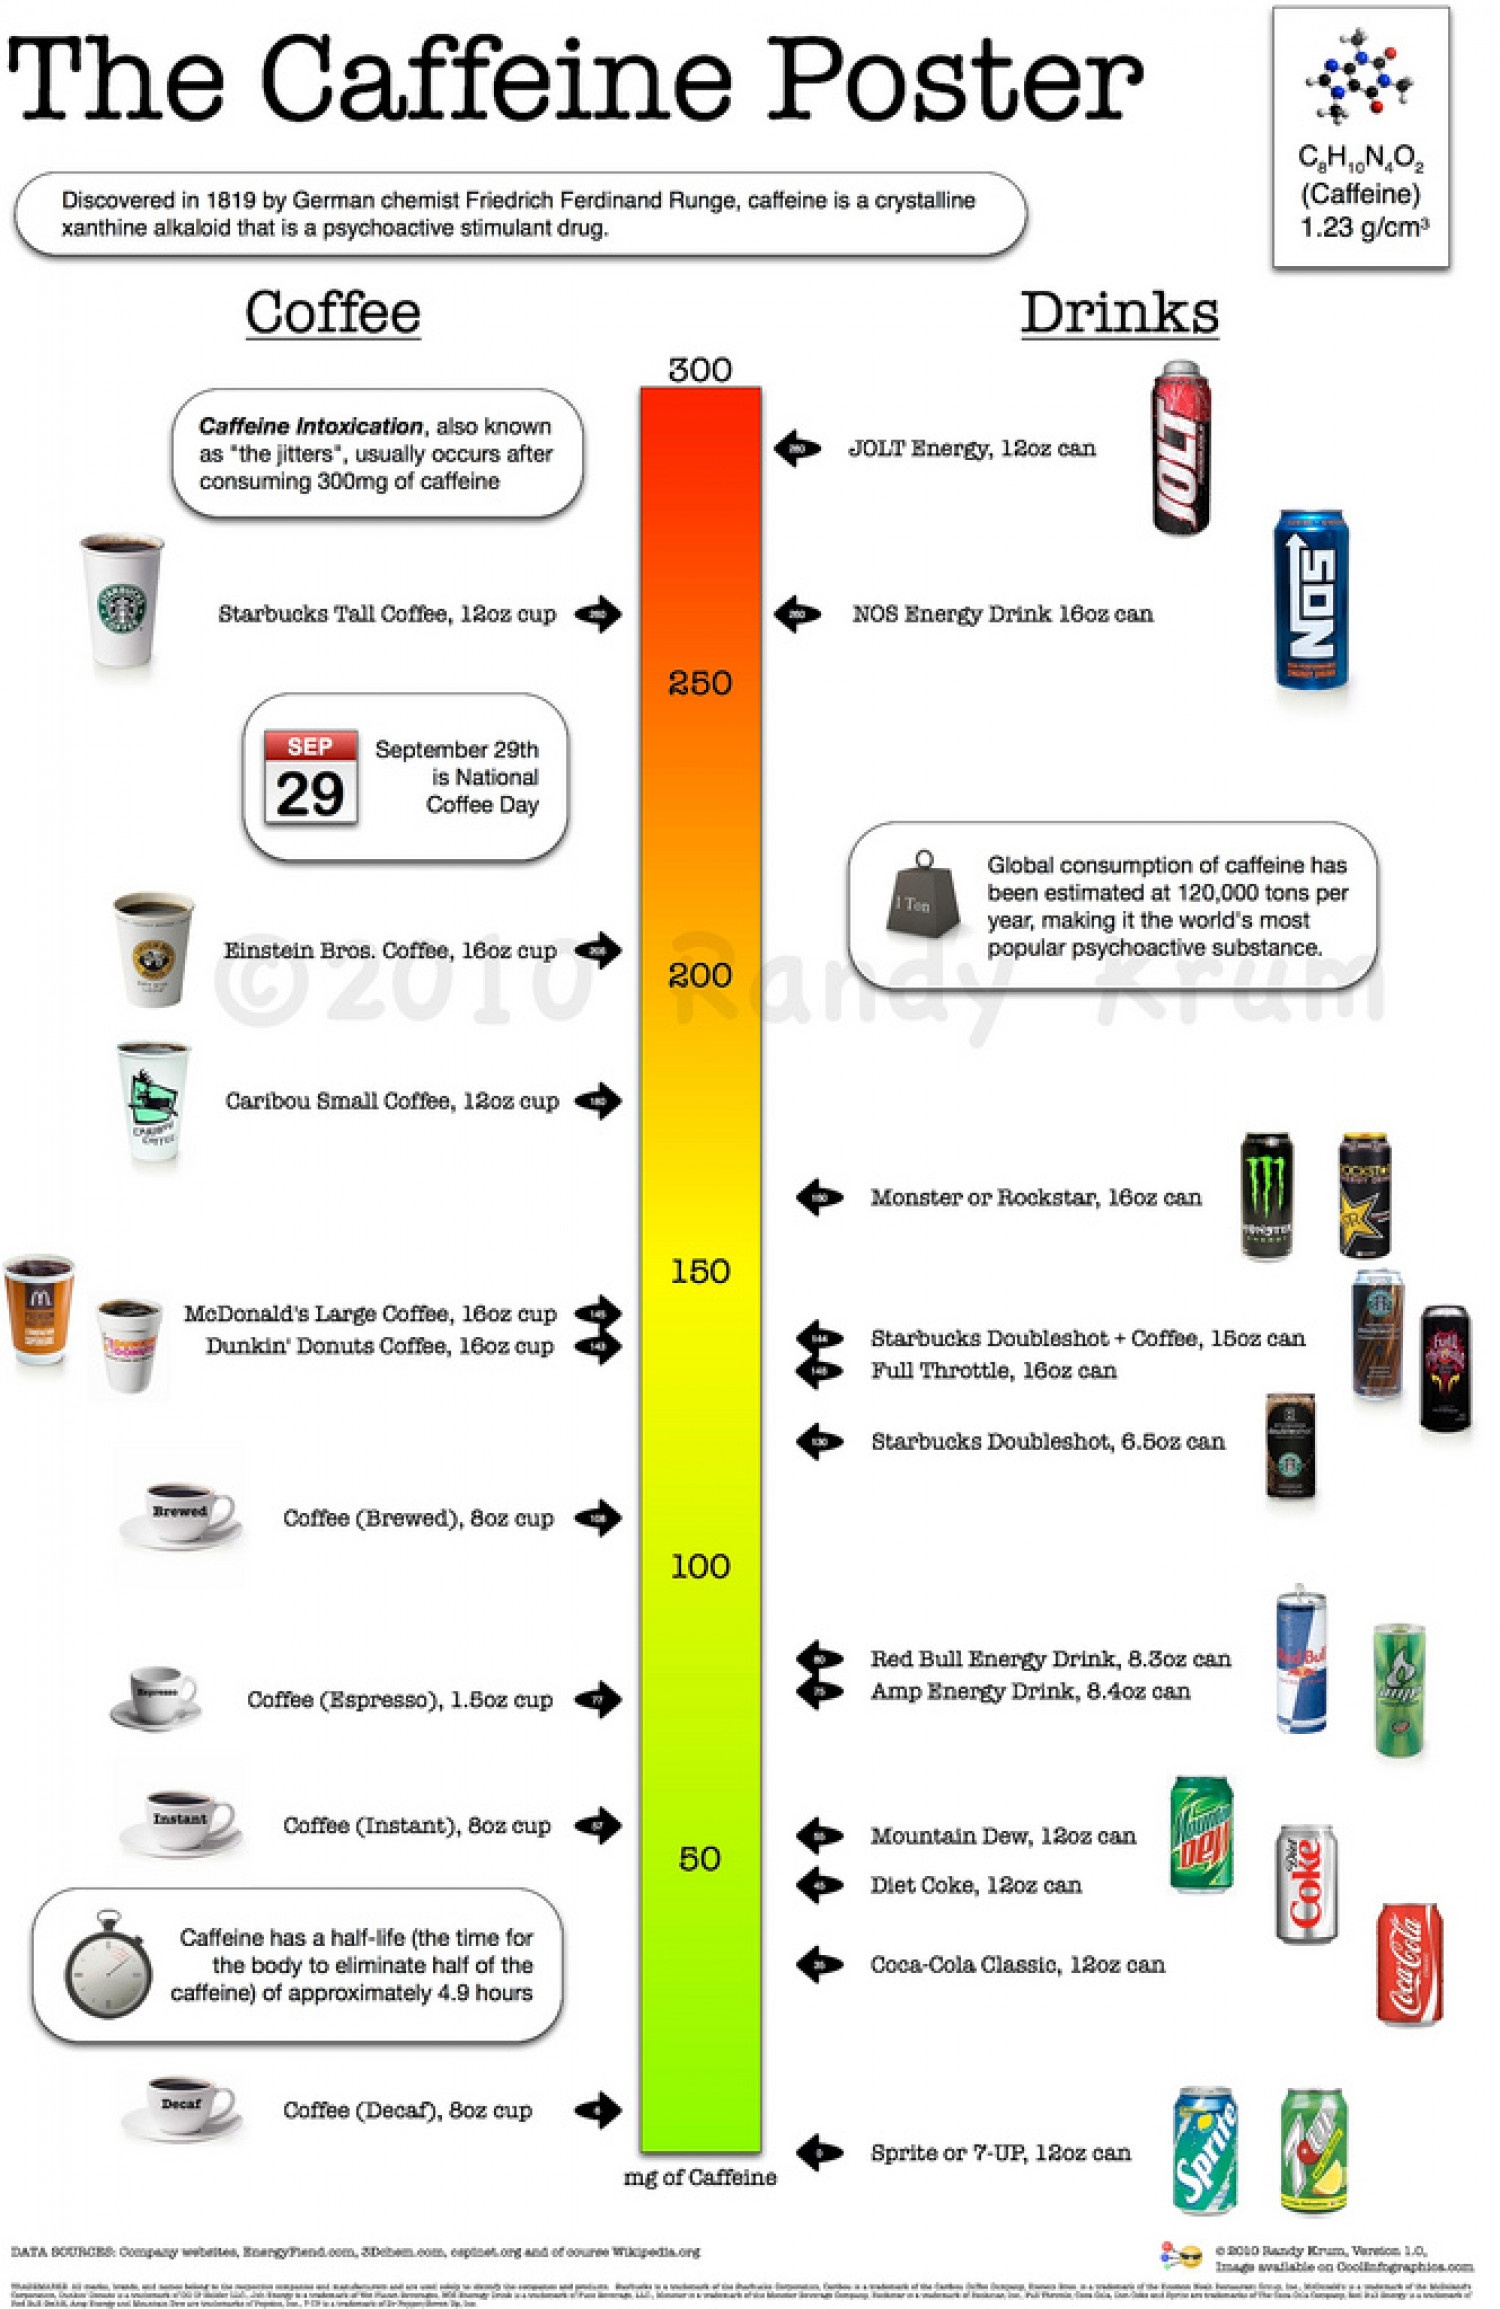 The Caffeine Poster, How Much Caffeine Are You Drinking? Infographic